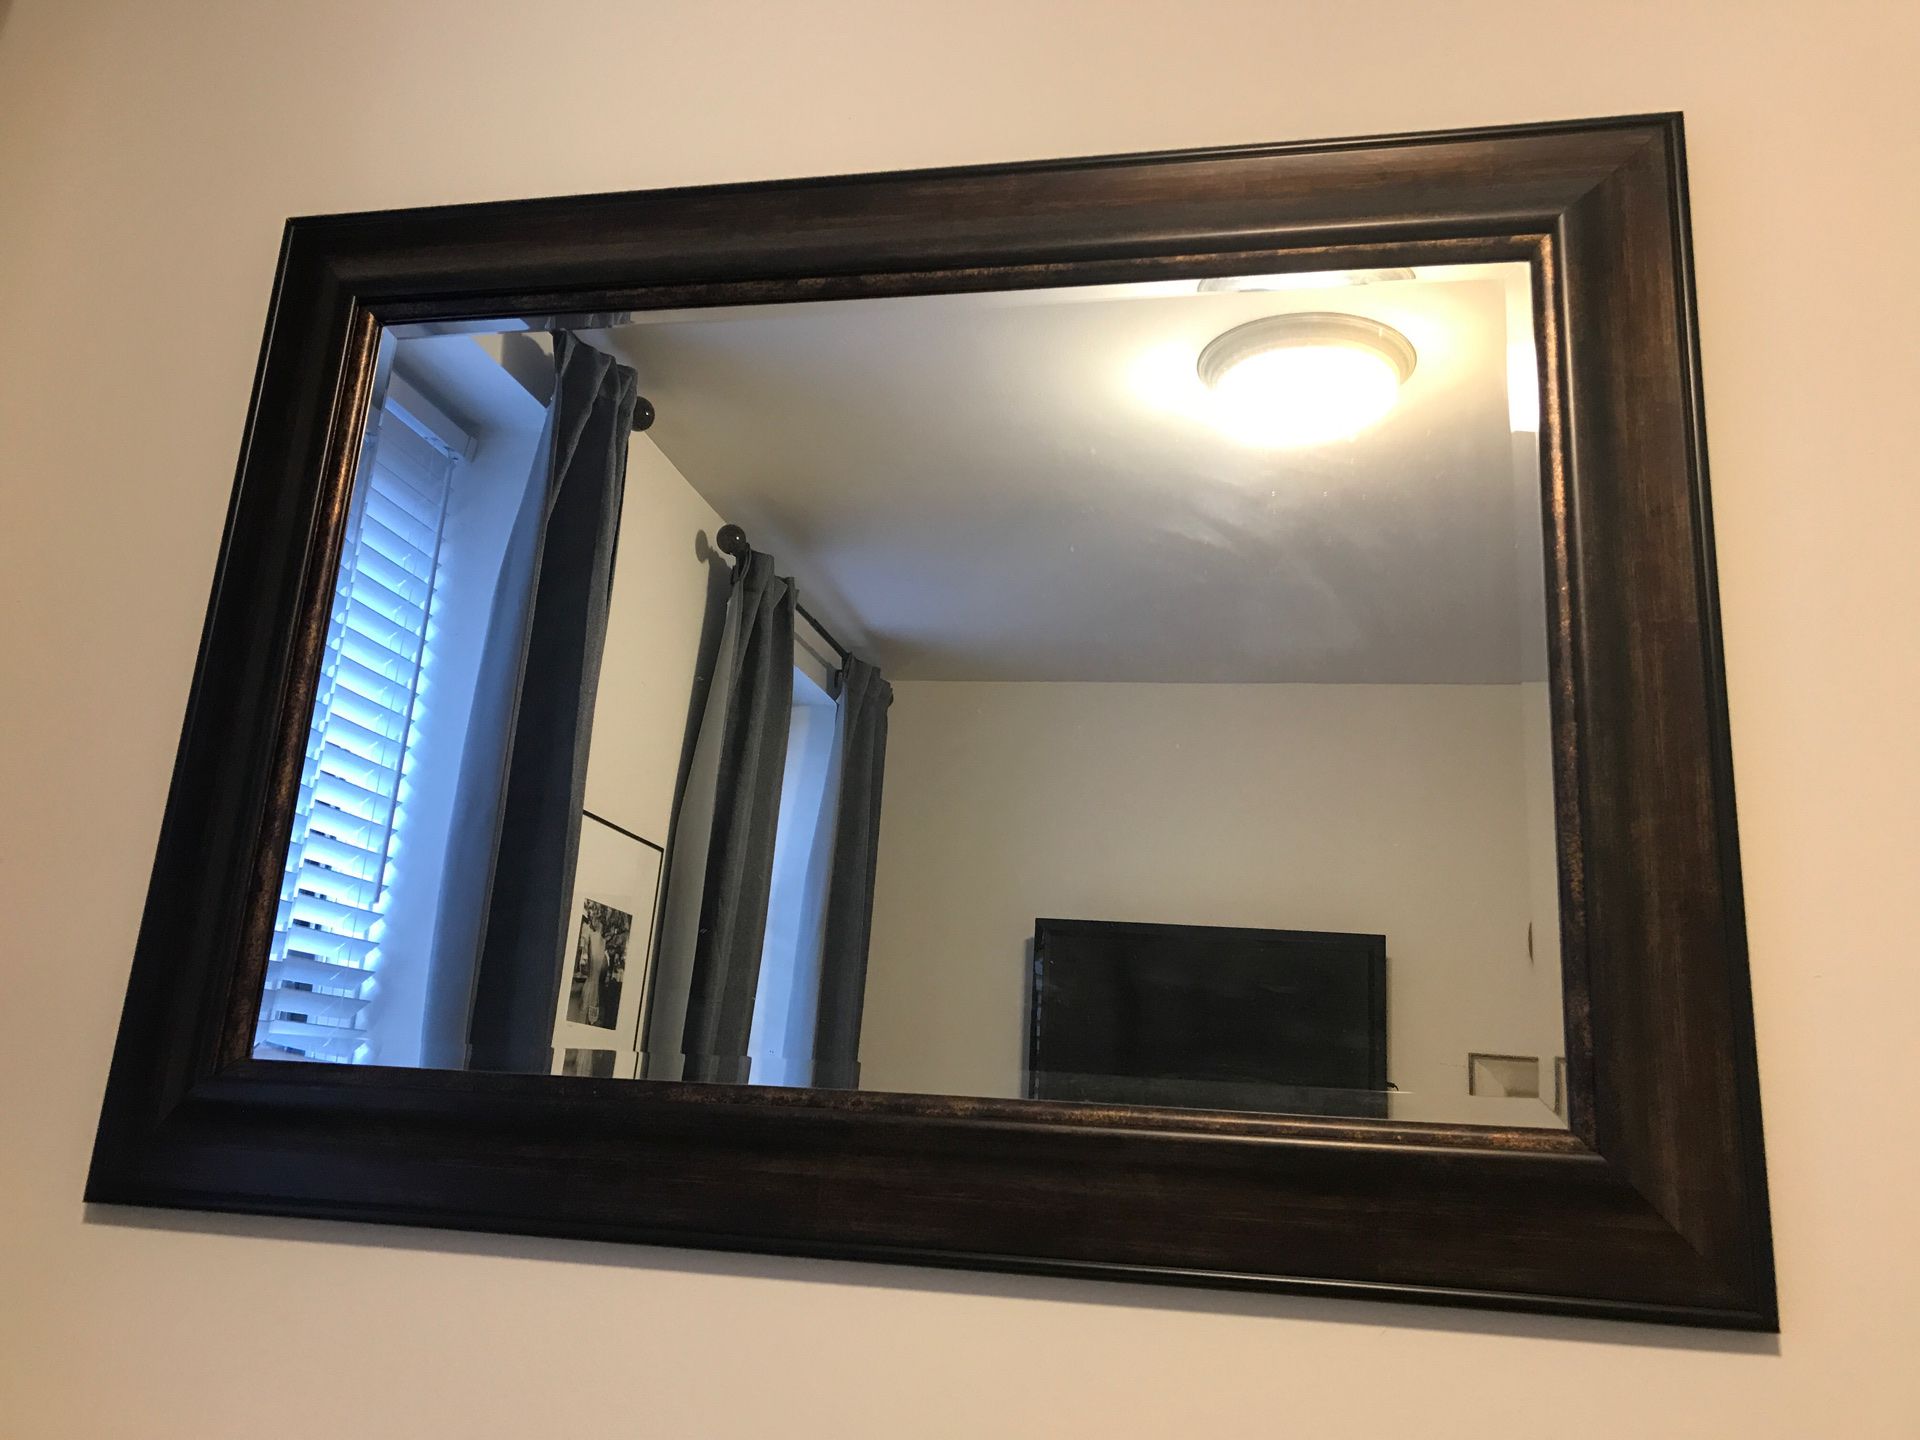 Mirror for sale $50 like brand new!